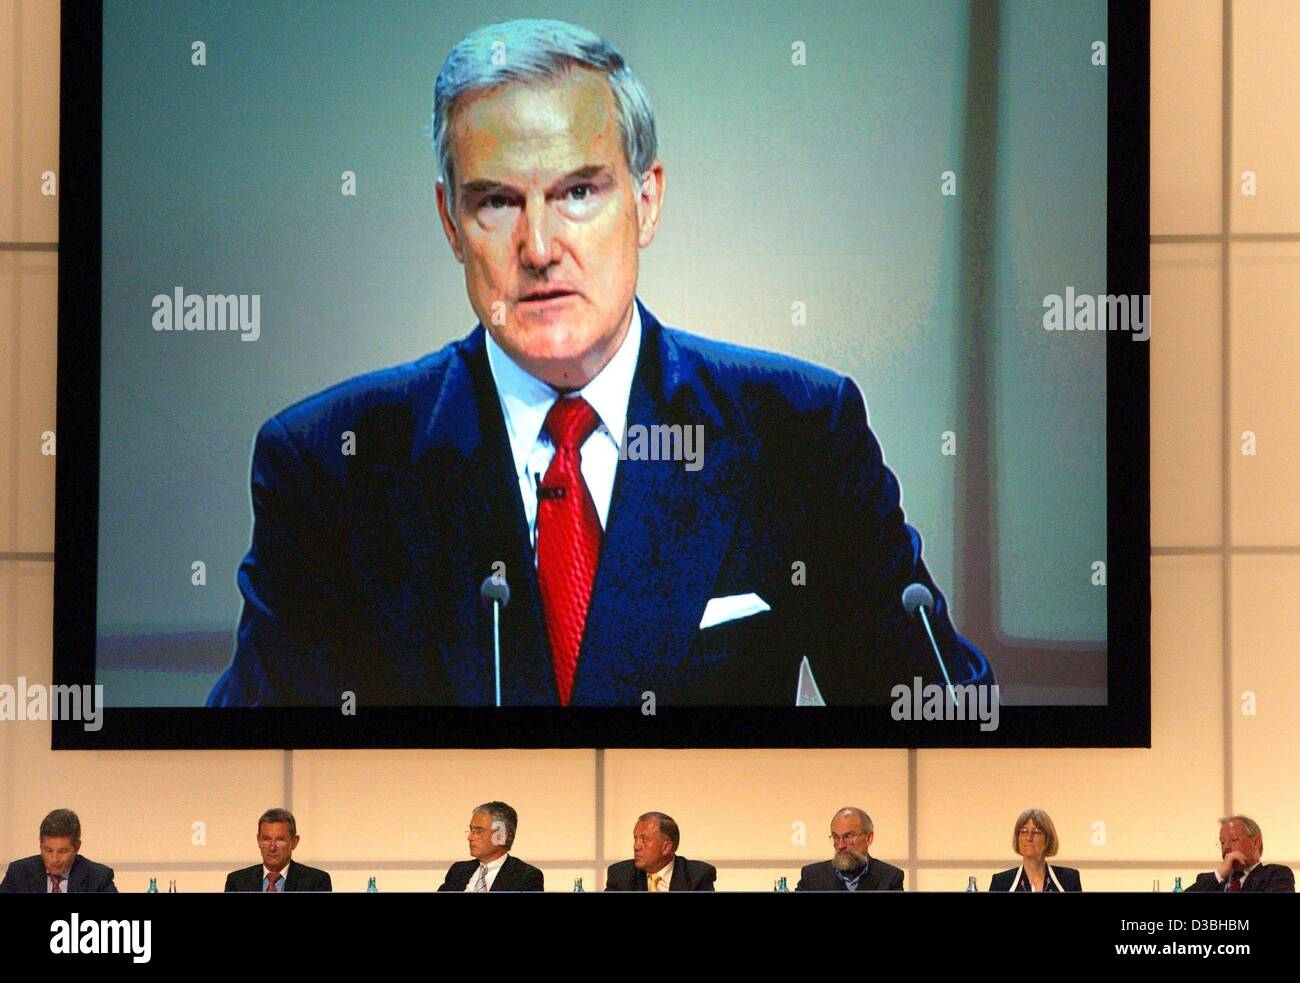 (dpa) - Hans-Juergen Schinzler, CEO of the reinsurance company Muenchener Rueckversicherungs-Gesellschaft AG, is shown on a large screen while speaking at the annual general meeting, Munich, 11 June 2003. The biggest reassurer worldwide has made losses in the past four quarters. '2002 has not met ou Stock Photo